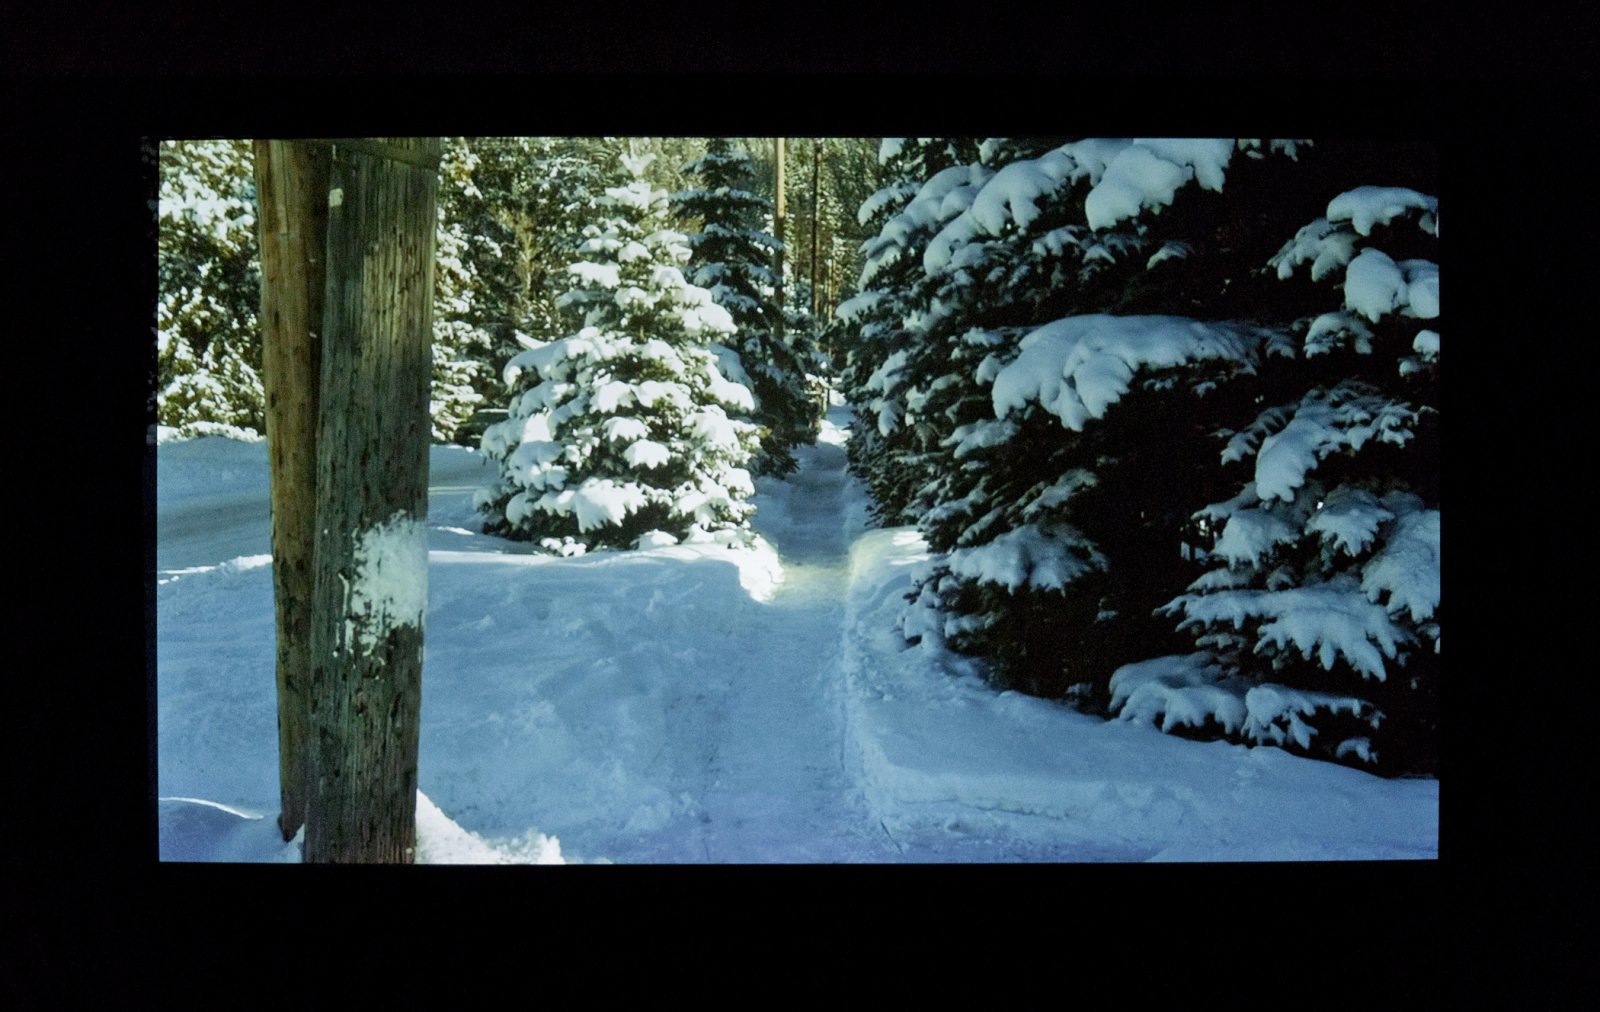 Duane Linklater, Something About Encounter, 2011-2013, HD iphone video with sound, dimensions variable. Installation view, Thunder Bay Art Gallery, Thunder Bay, 2013.